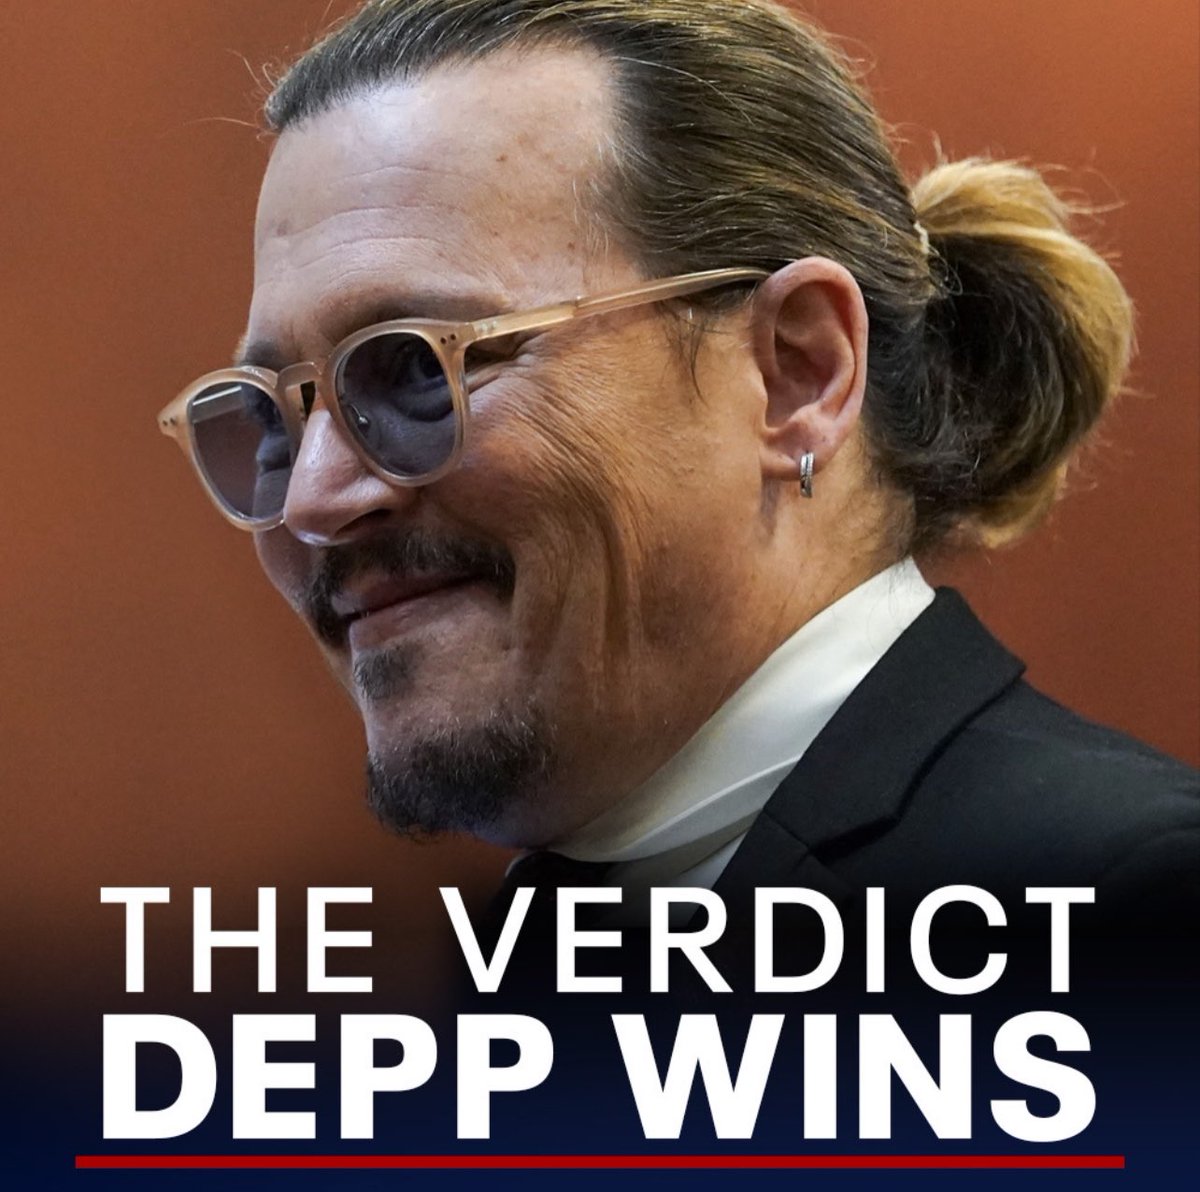 'No matter what happens,I did get here & I did tell the truth, & I've spoken up for what I've been carrying on my back reluctantly for 6 years'. #JohnnyDepp May 25, 2022.
#NeverFearTruth
#JohnnyDeppWon #JohnnyDeppisFree #JohnnyDeppIsASurvivor #JohnnyDeppRises #JohnnyDeppIsALegend